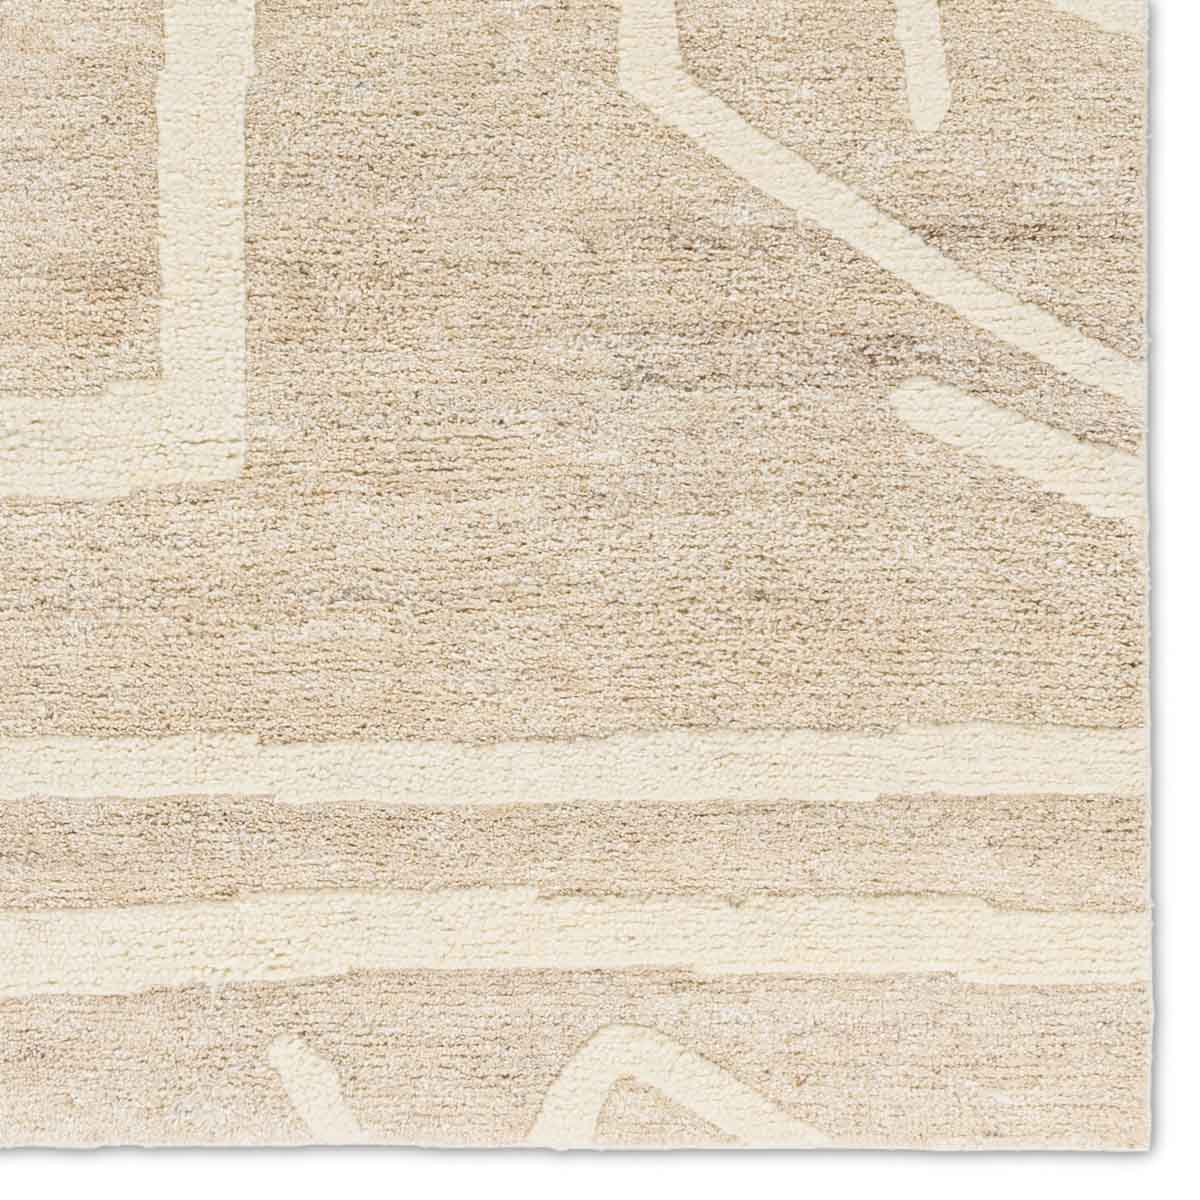 The Keoka Madaya Rug boasts a fresh take on classic Afghani hand-knotted textiles. In rich, grounding tones of gray and ivory, the stylish contrast of the Madaya rug anchors room with bold yet neutral appeal. Amethyst Home provides interior design services, furniture, rugs, and lighting in the Kansas City metro area.